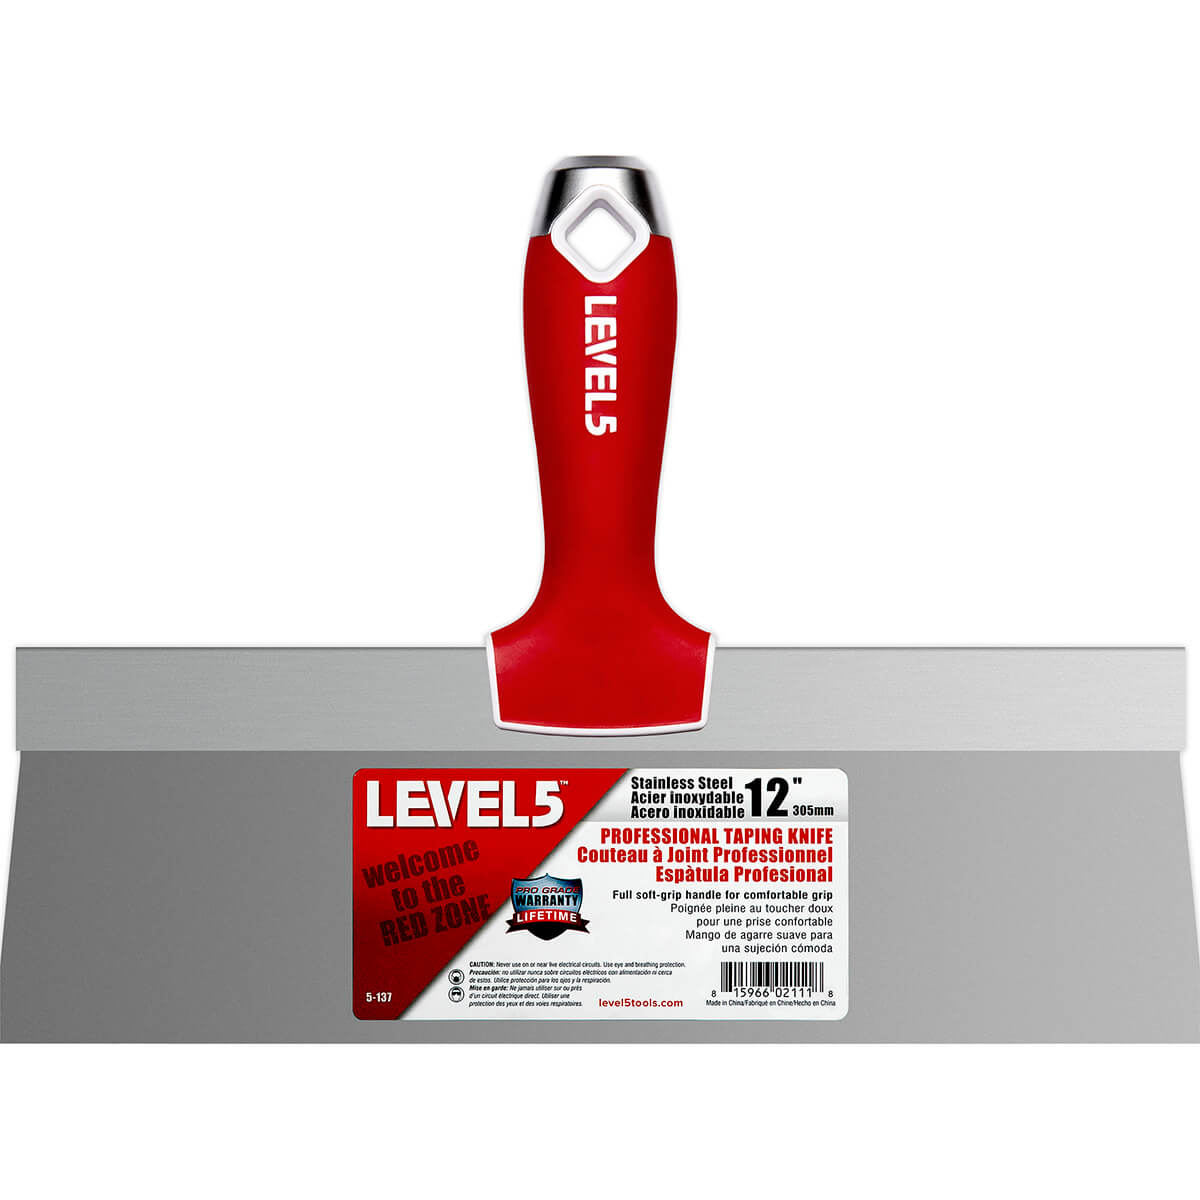 TAPING KNIFE LEVEL5 12" Stainless Steel Taping Knife with Soft Grip Handle SKU: 5-137